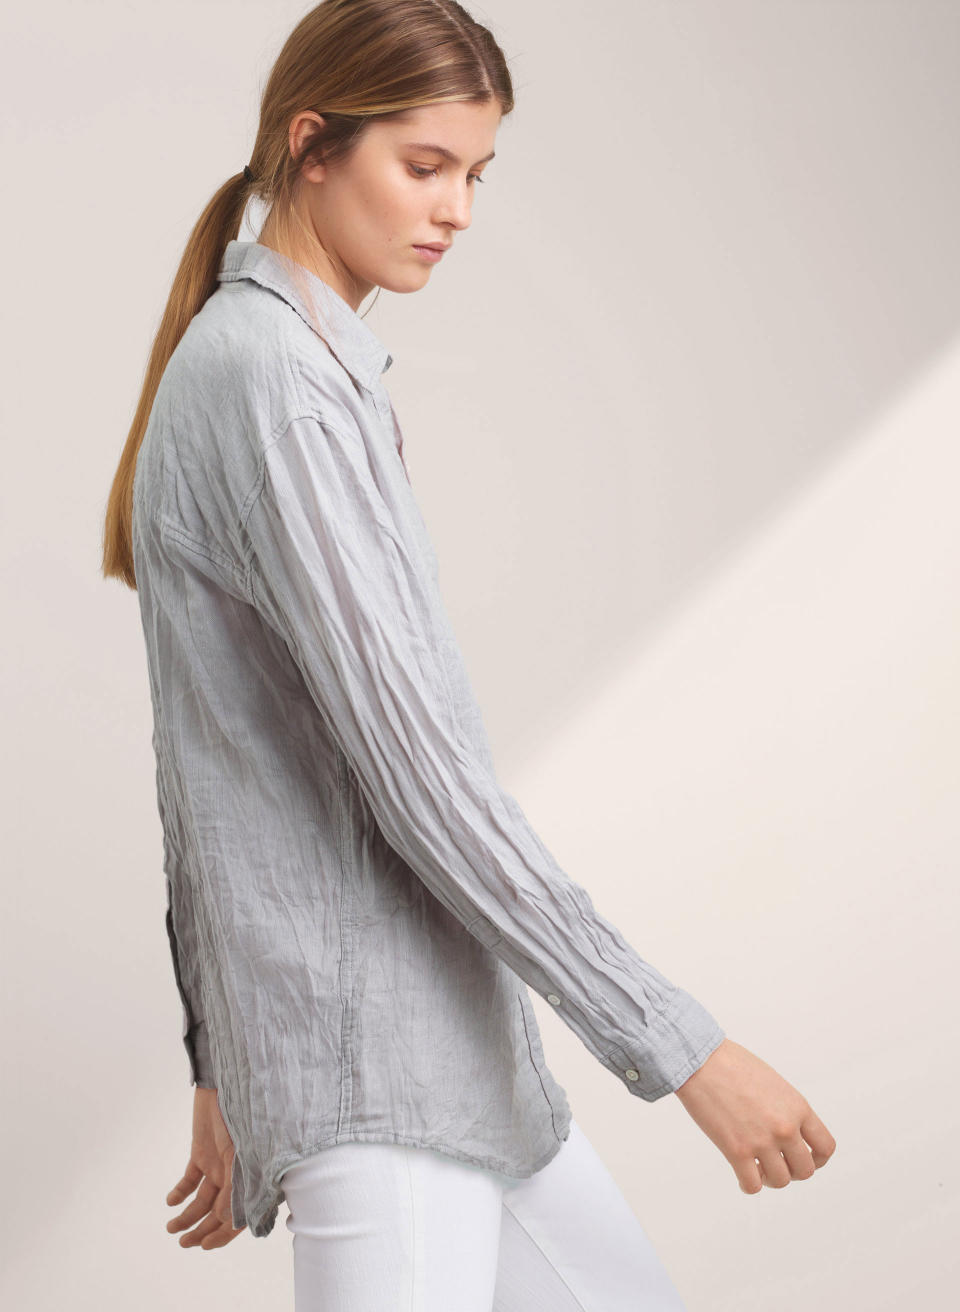 <p>For date night with Harry, she matched her boyfriend in a button down and jeans. United By Blue Galway Dot Button Down, $25; <span>6pm.com </span>Mid Rise True Skinny Ankle Jeans, $35; <span>gap.com </span>Plisse Duster Coat, $110; <span>topshop.com </span>Burberry Hazelhurst 115 Suede Ankle Boots, $450; <span>saksoff5th.com</span></p>